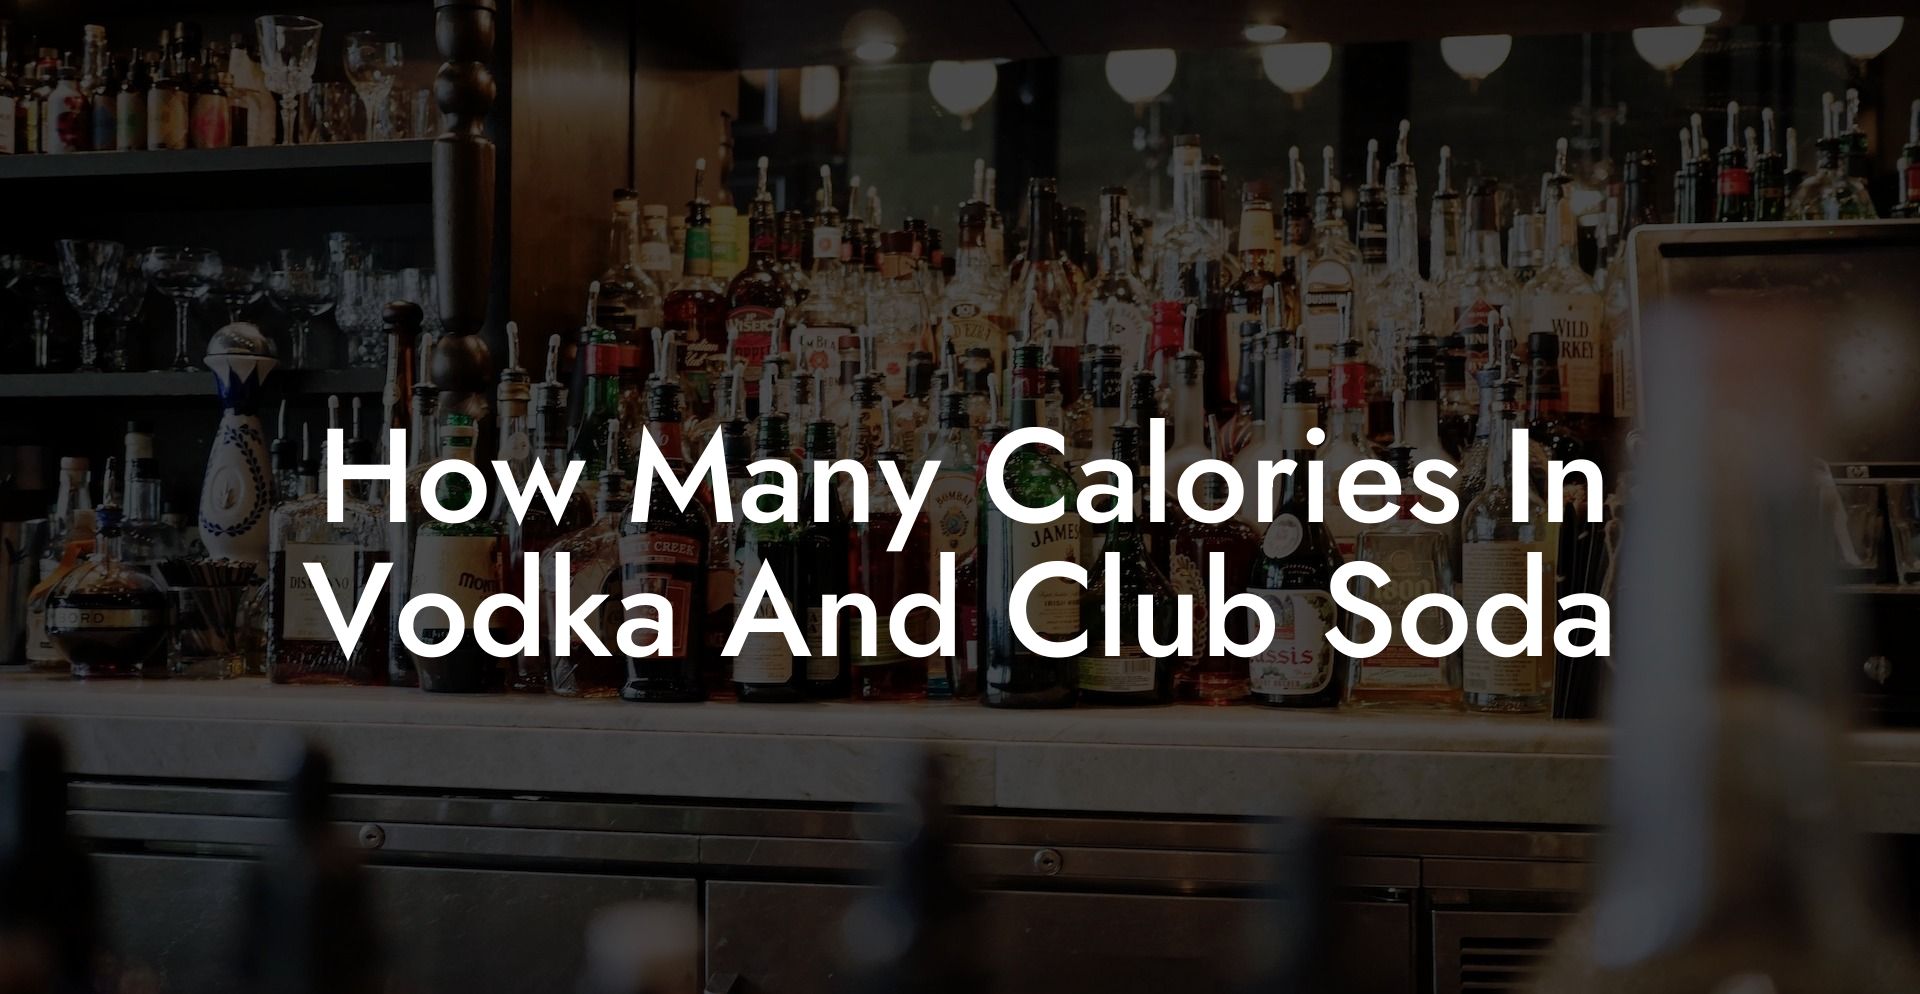 How Many Calories In Vodka And Club Soda